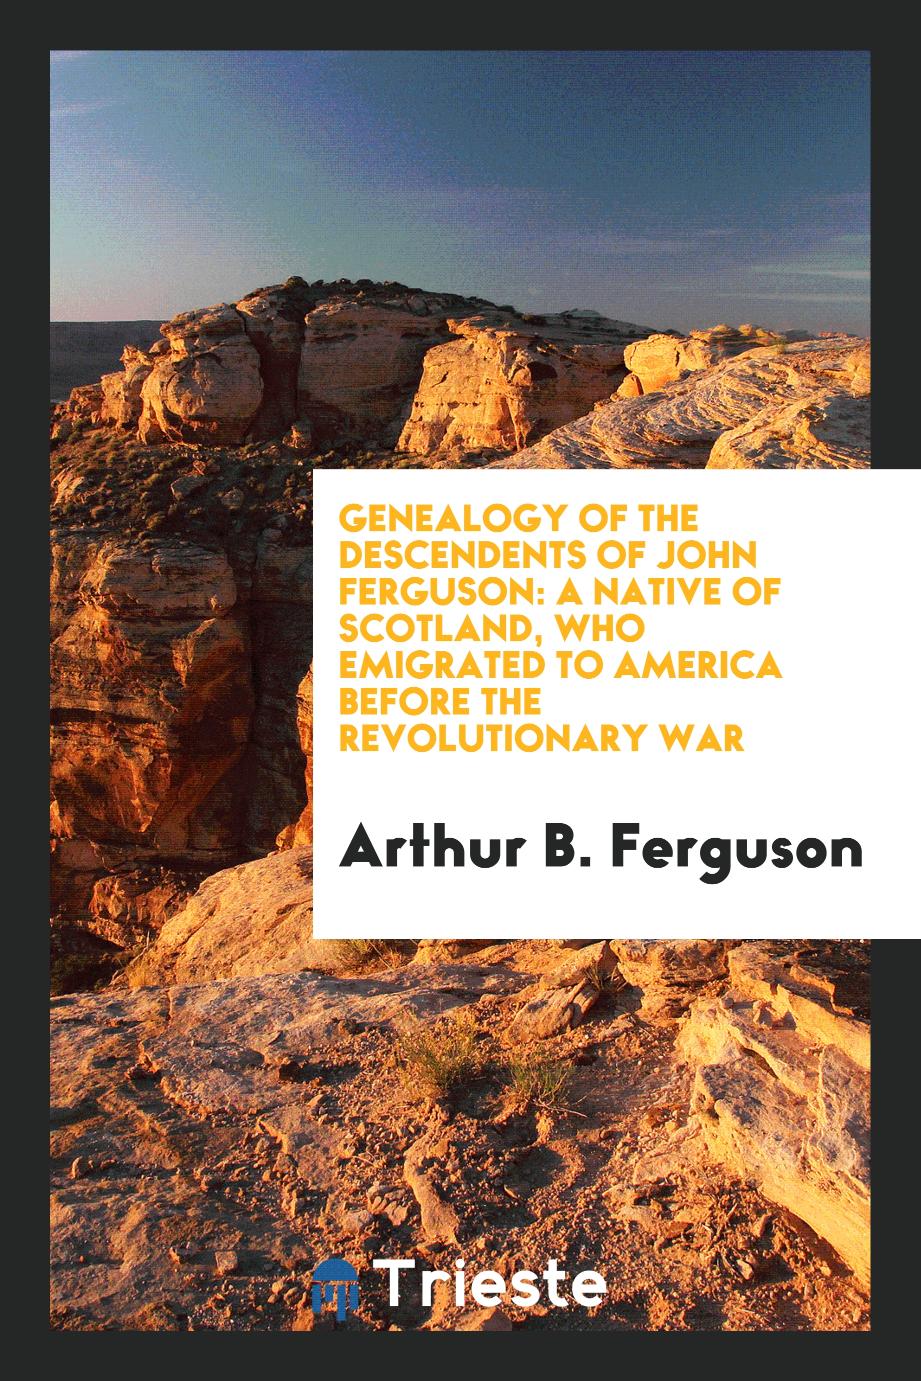 Genealogy of the Descendents of John Ferguson: A Native of Scotland, Who Emigrated to America before the Revolutionary War